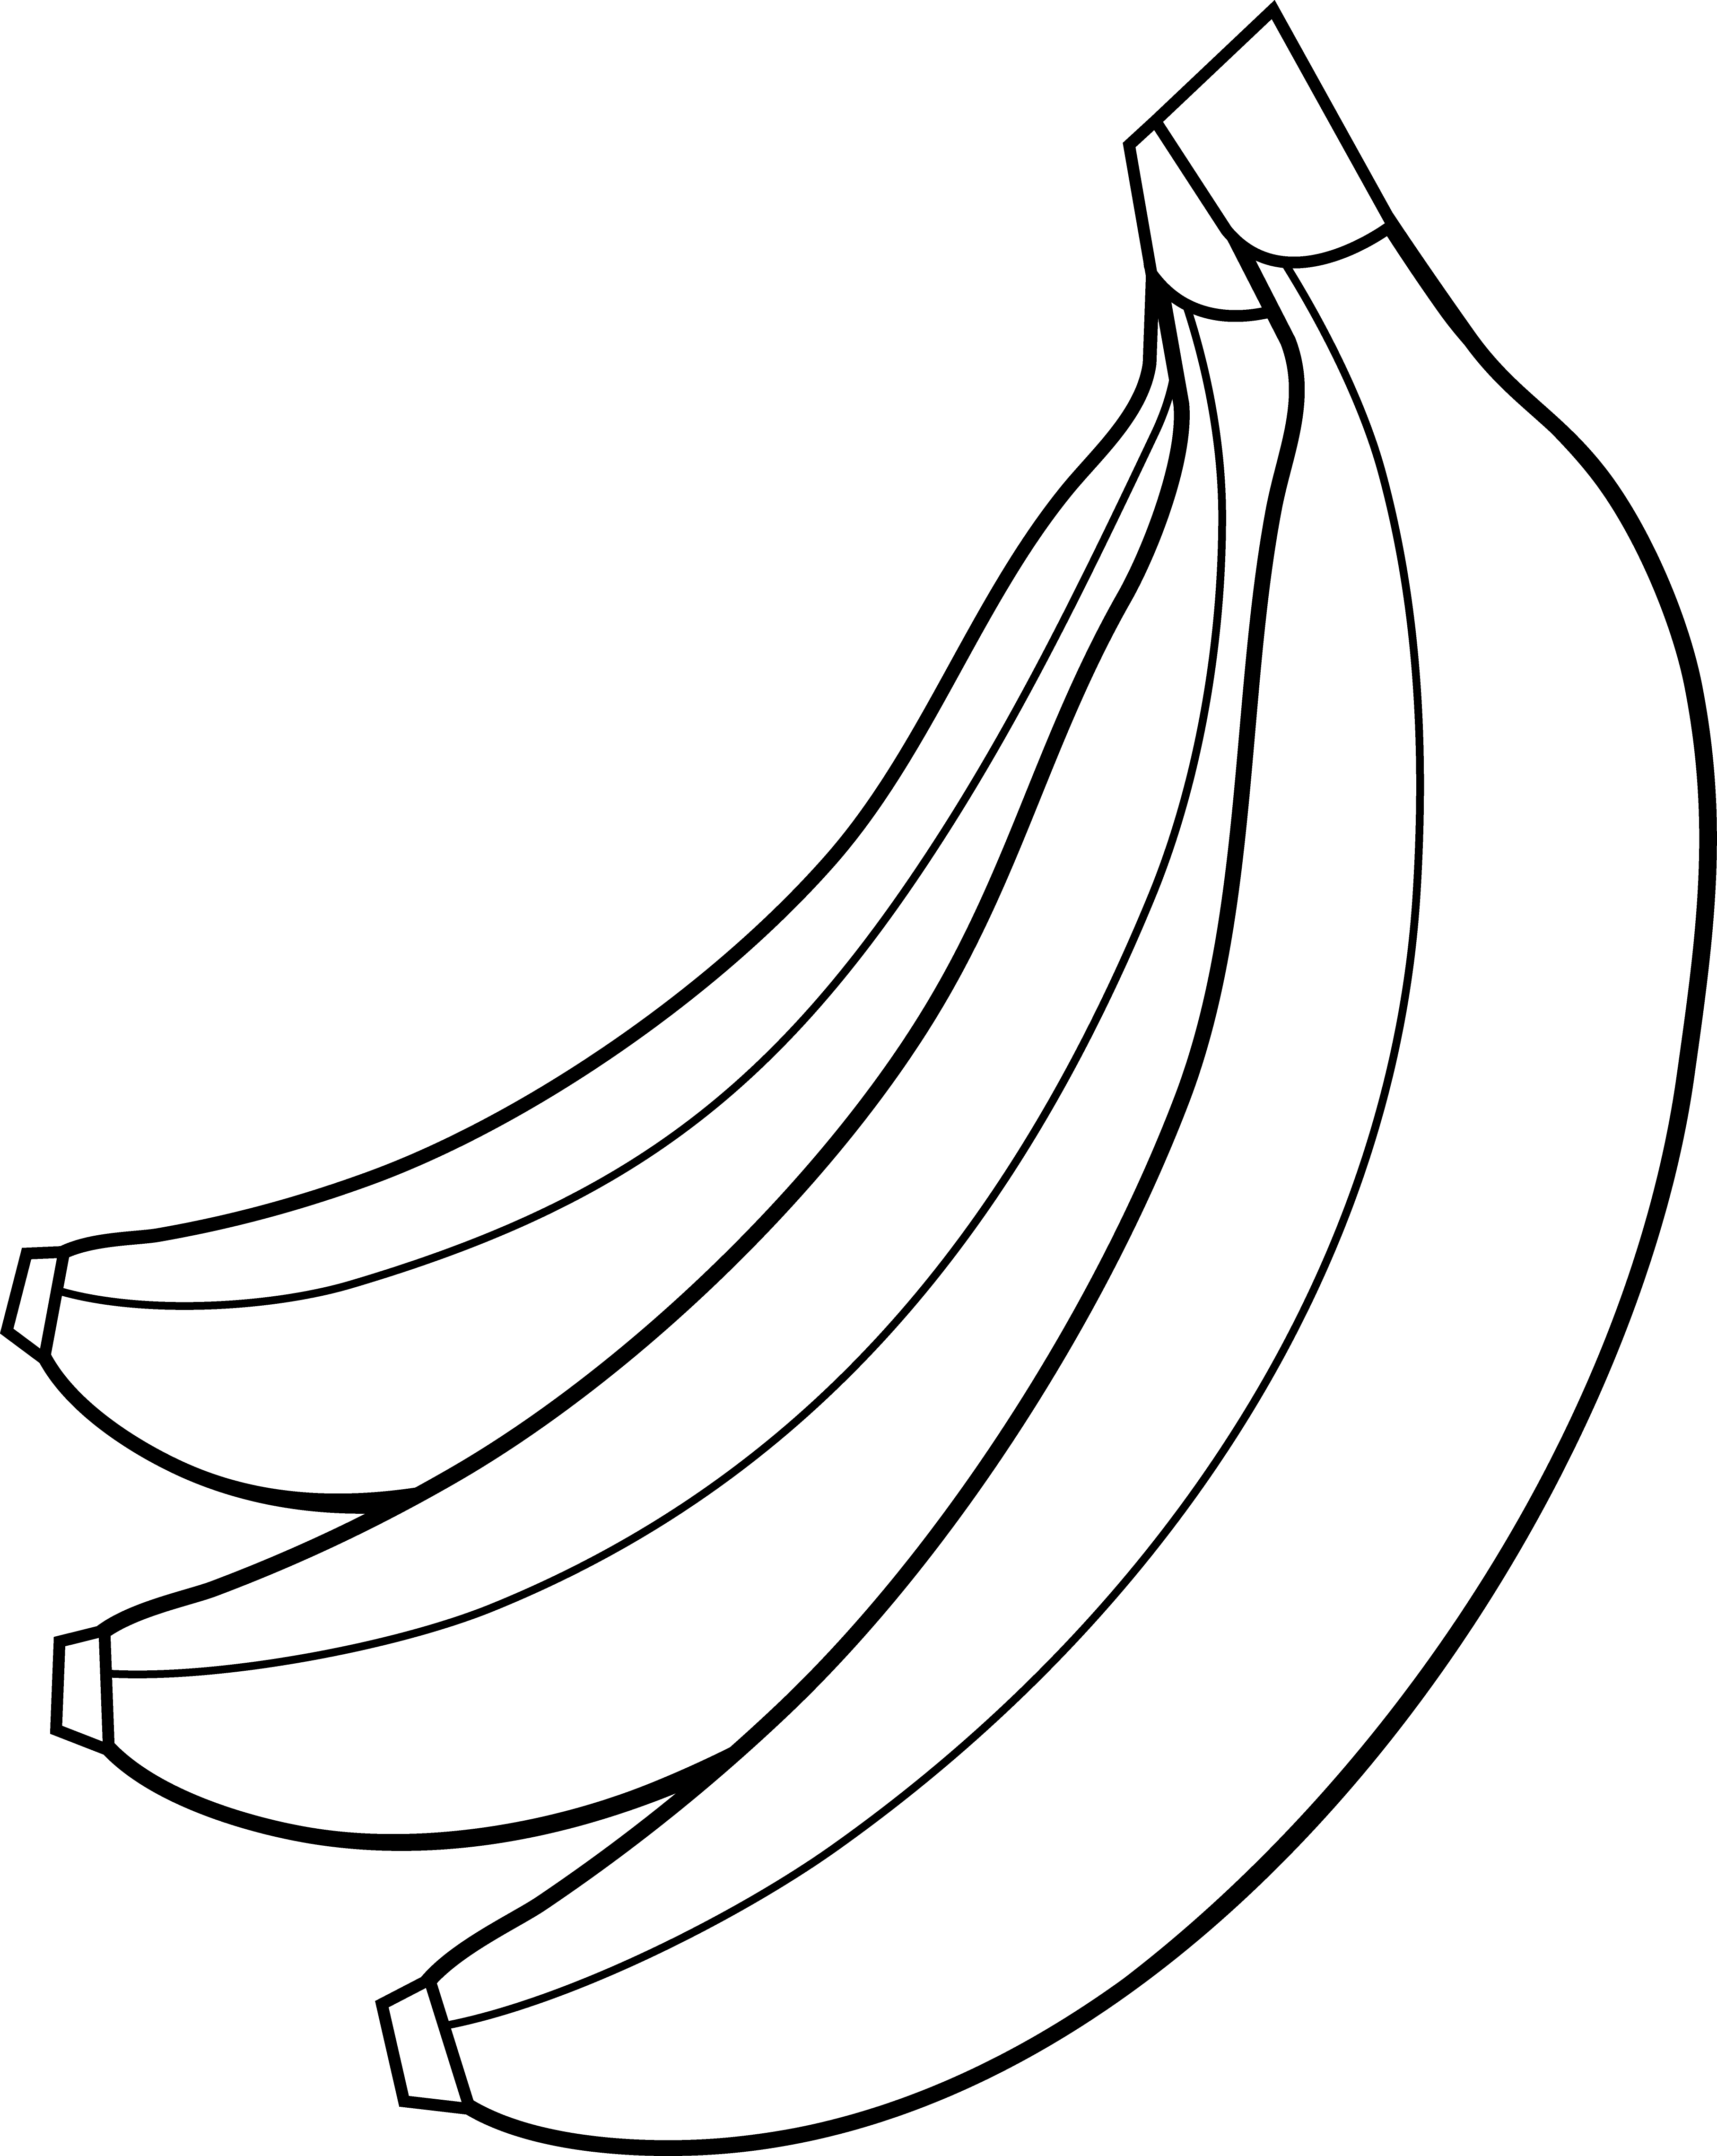 clipart of banana Colouring Pages